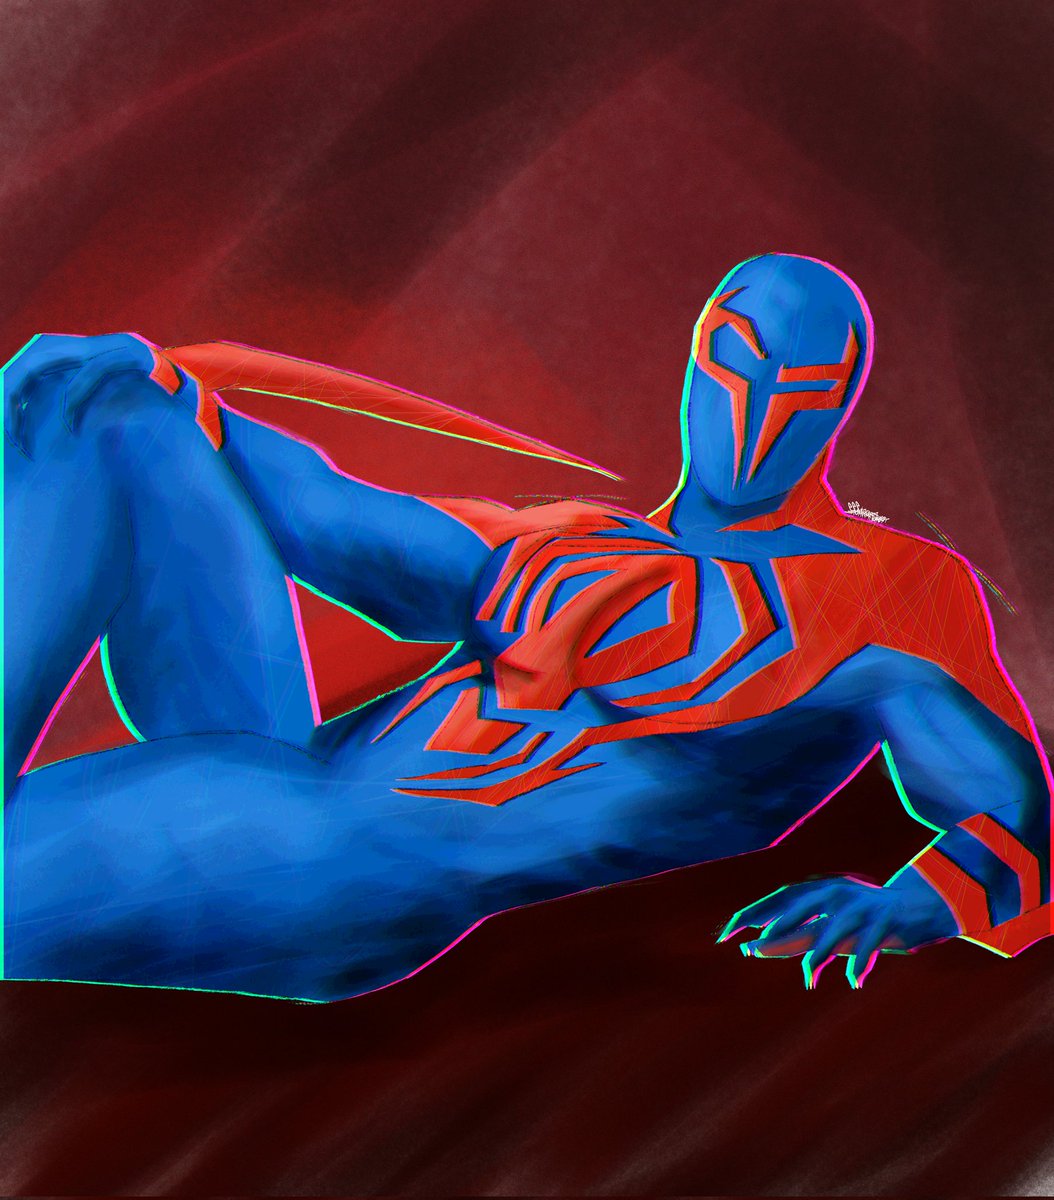 Miguelito from Fortnite

#Spiderman2099 #MiguelOHara